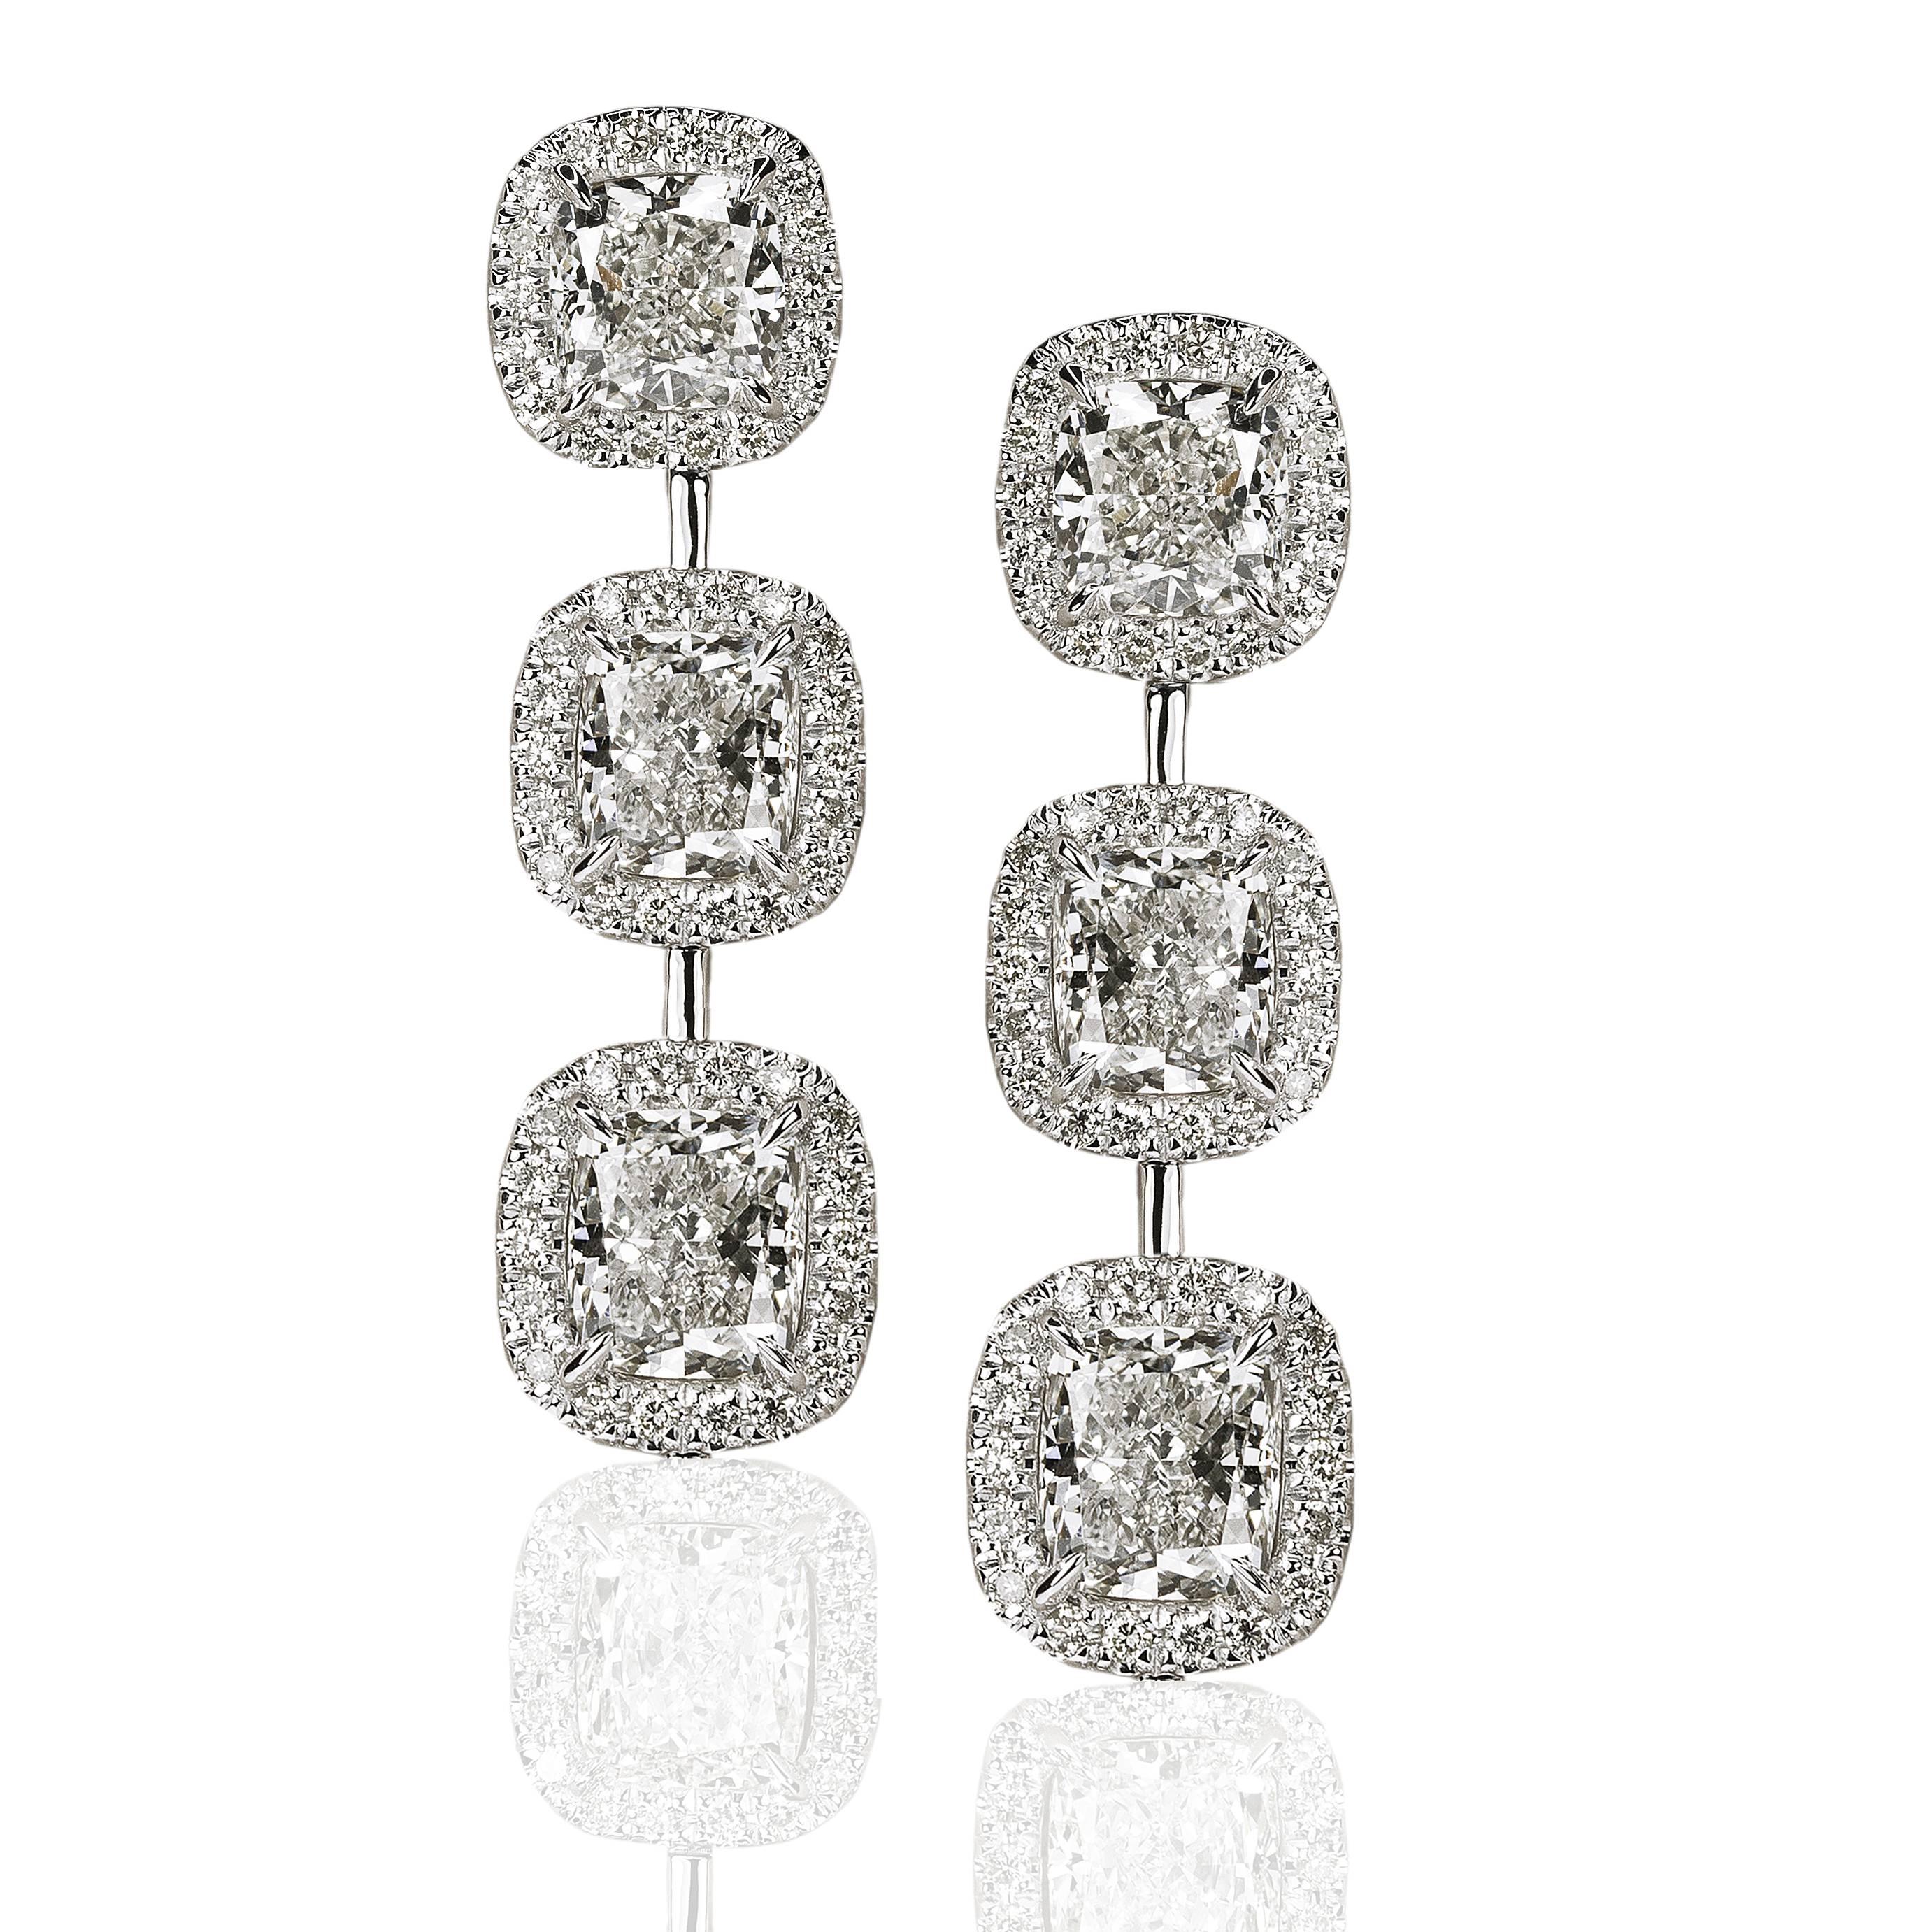 Stunning 18k earrings set with six cushion brilliant cut diamonds weighing 6.35 carats, each surrounded by  round brilliant diamonds totaling 0.78 carats.